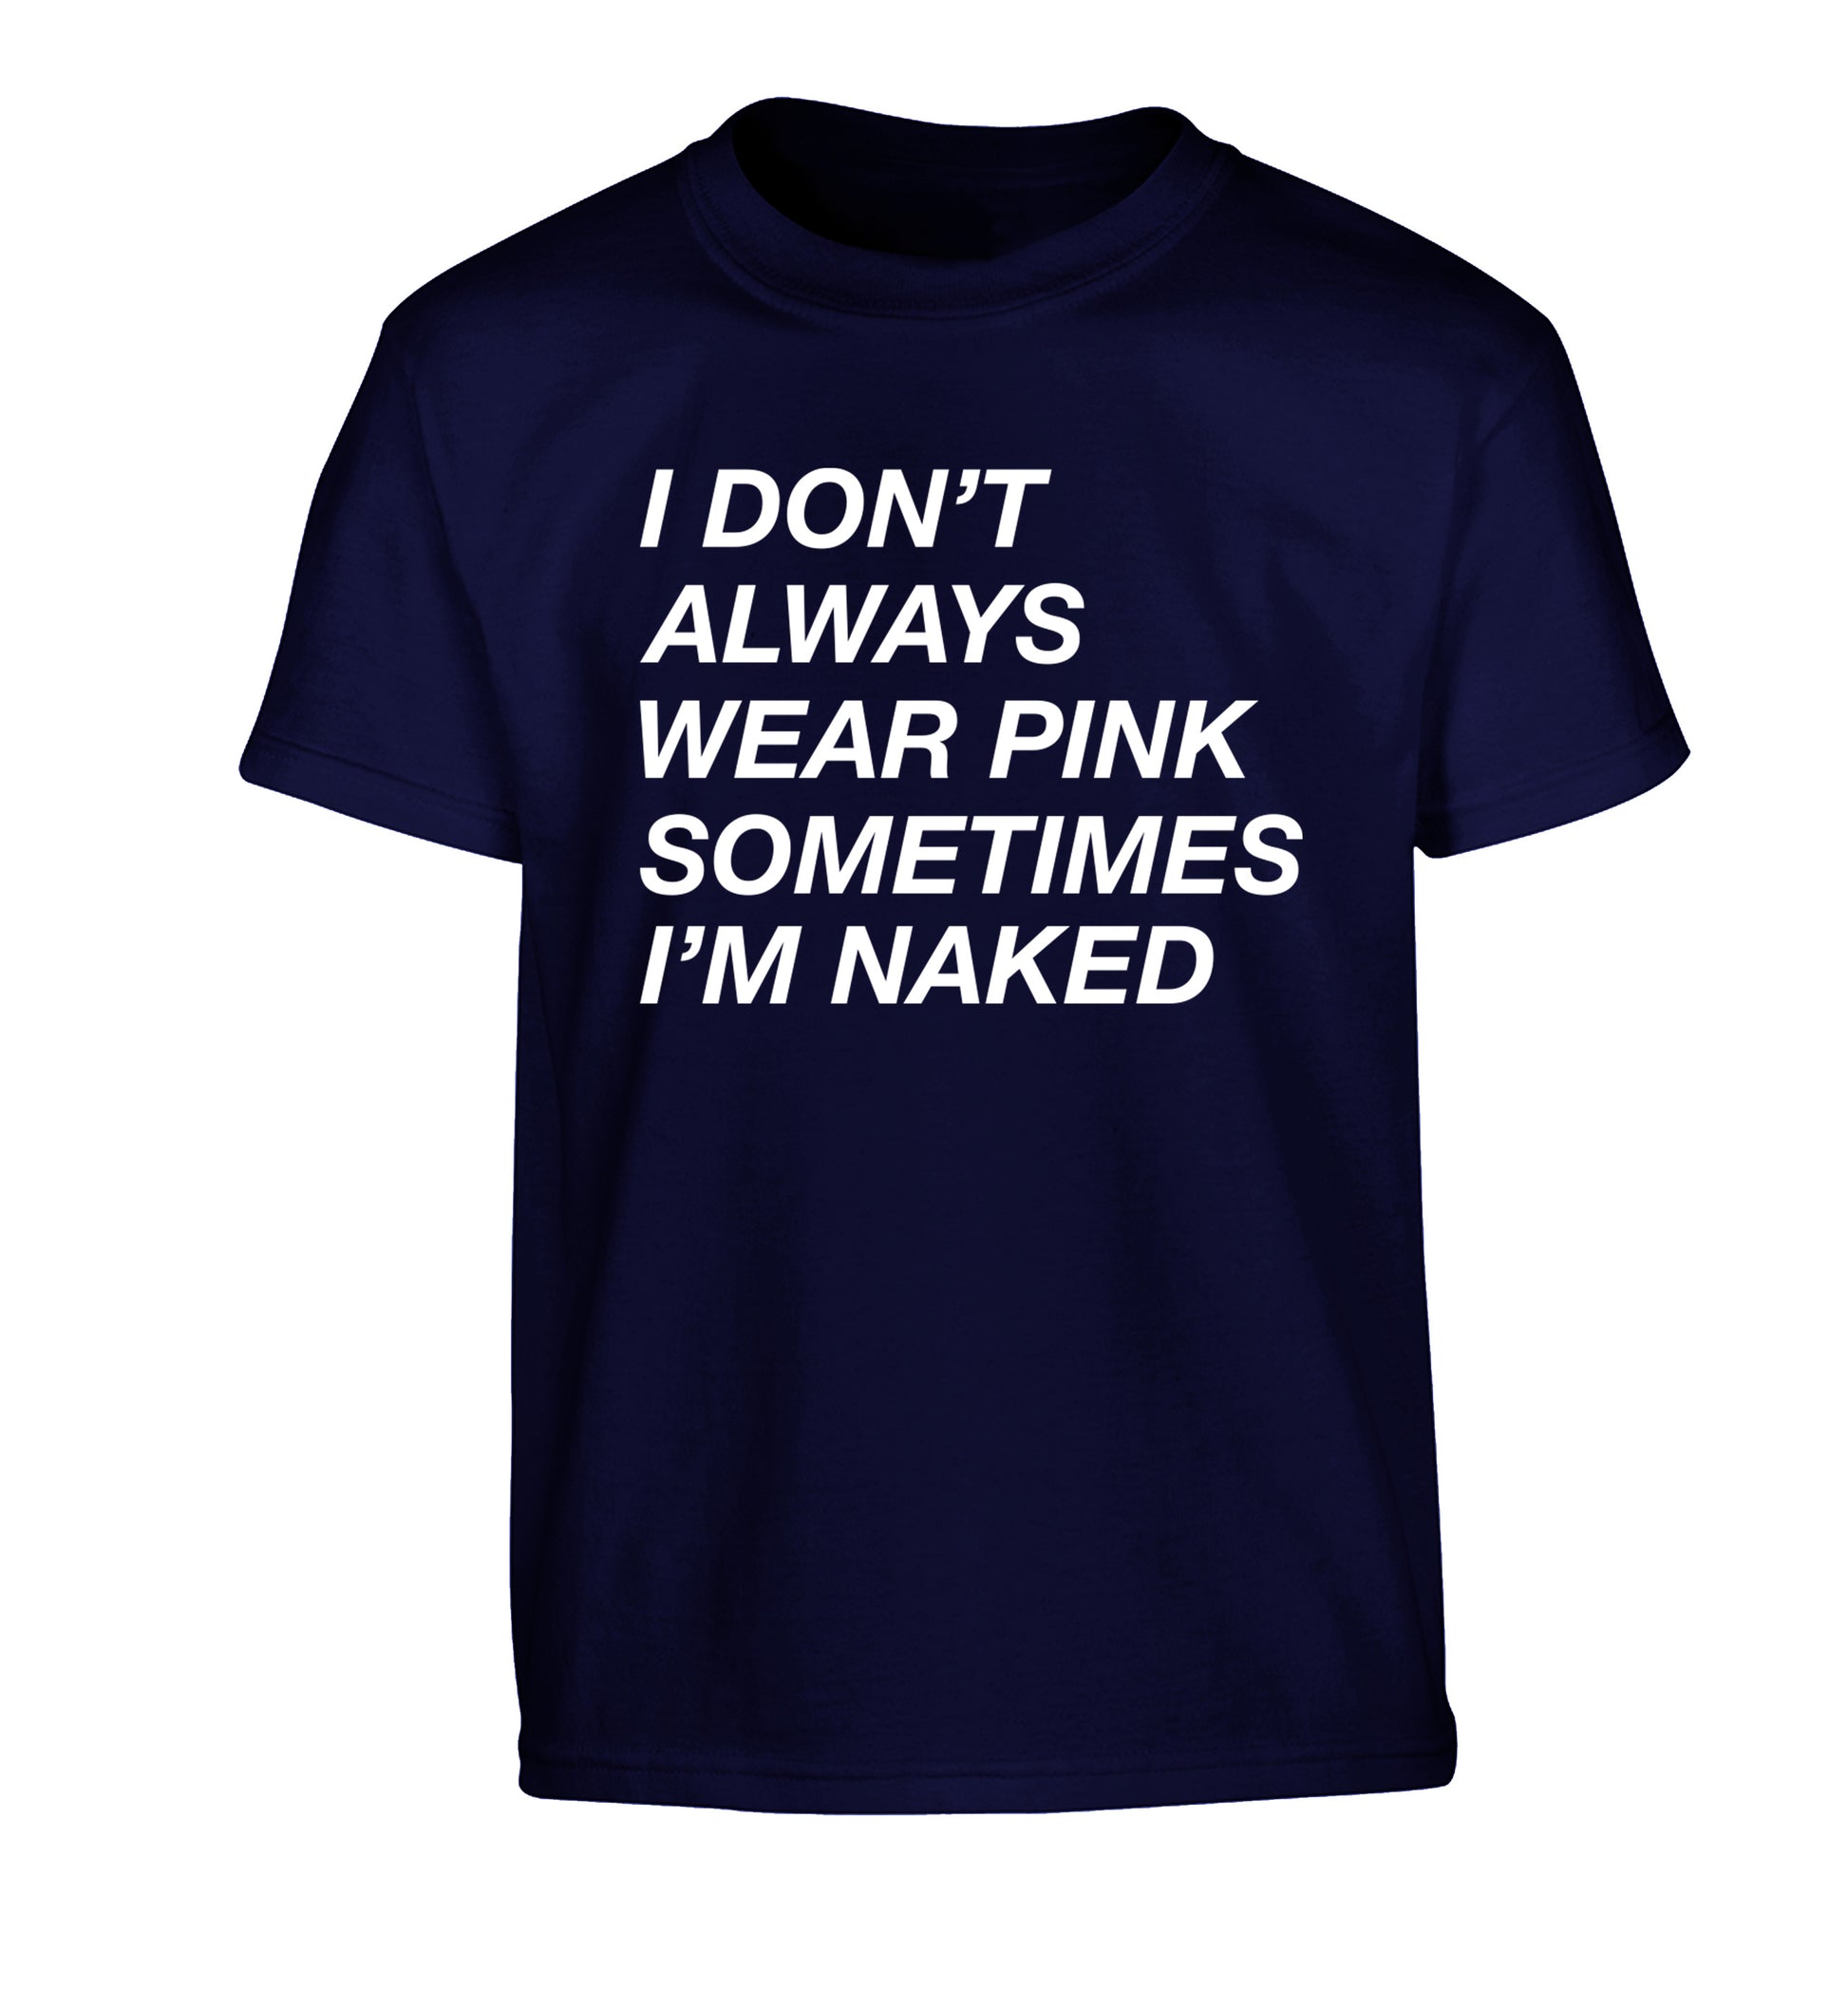 I don't always wear pink sometimes I'm naked Children's navy Tshirt 12-13 Years